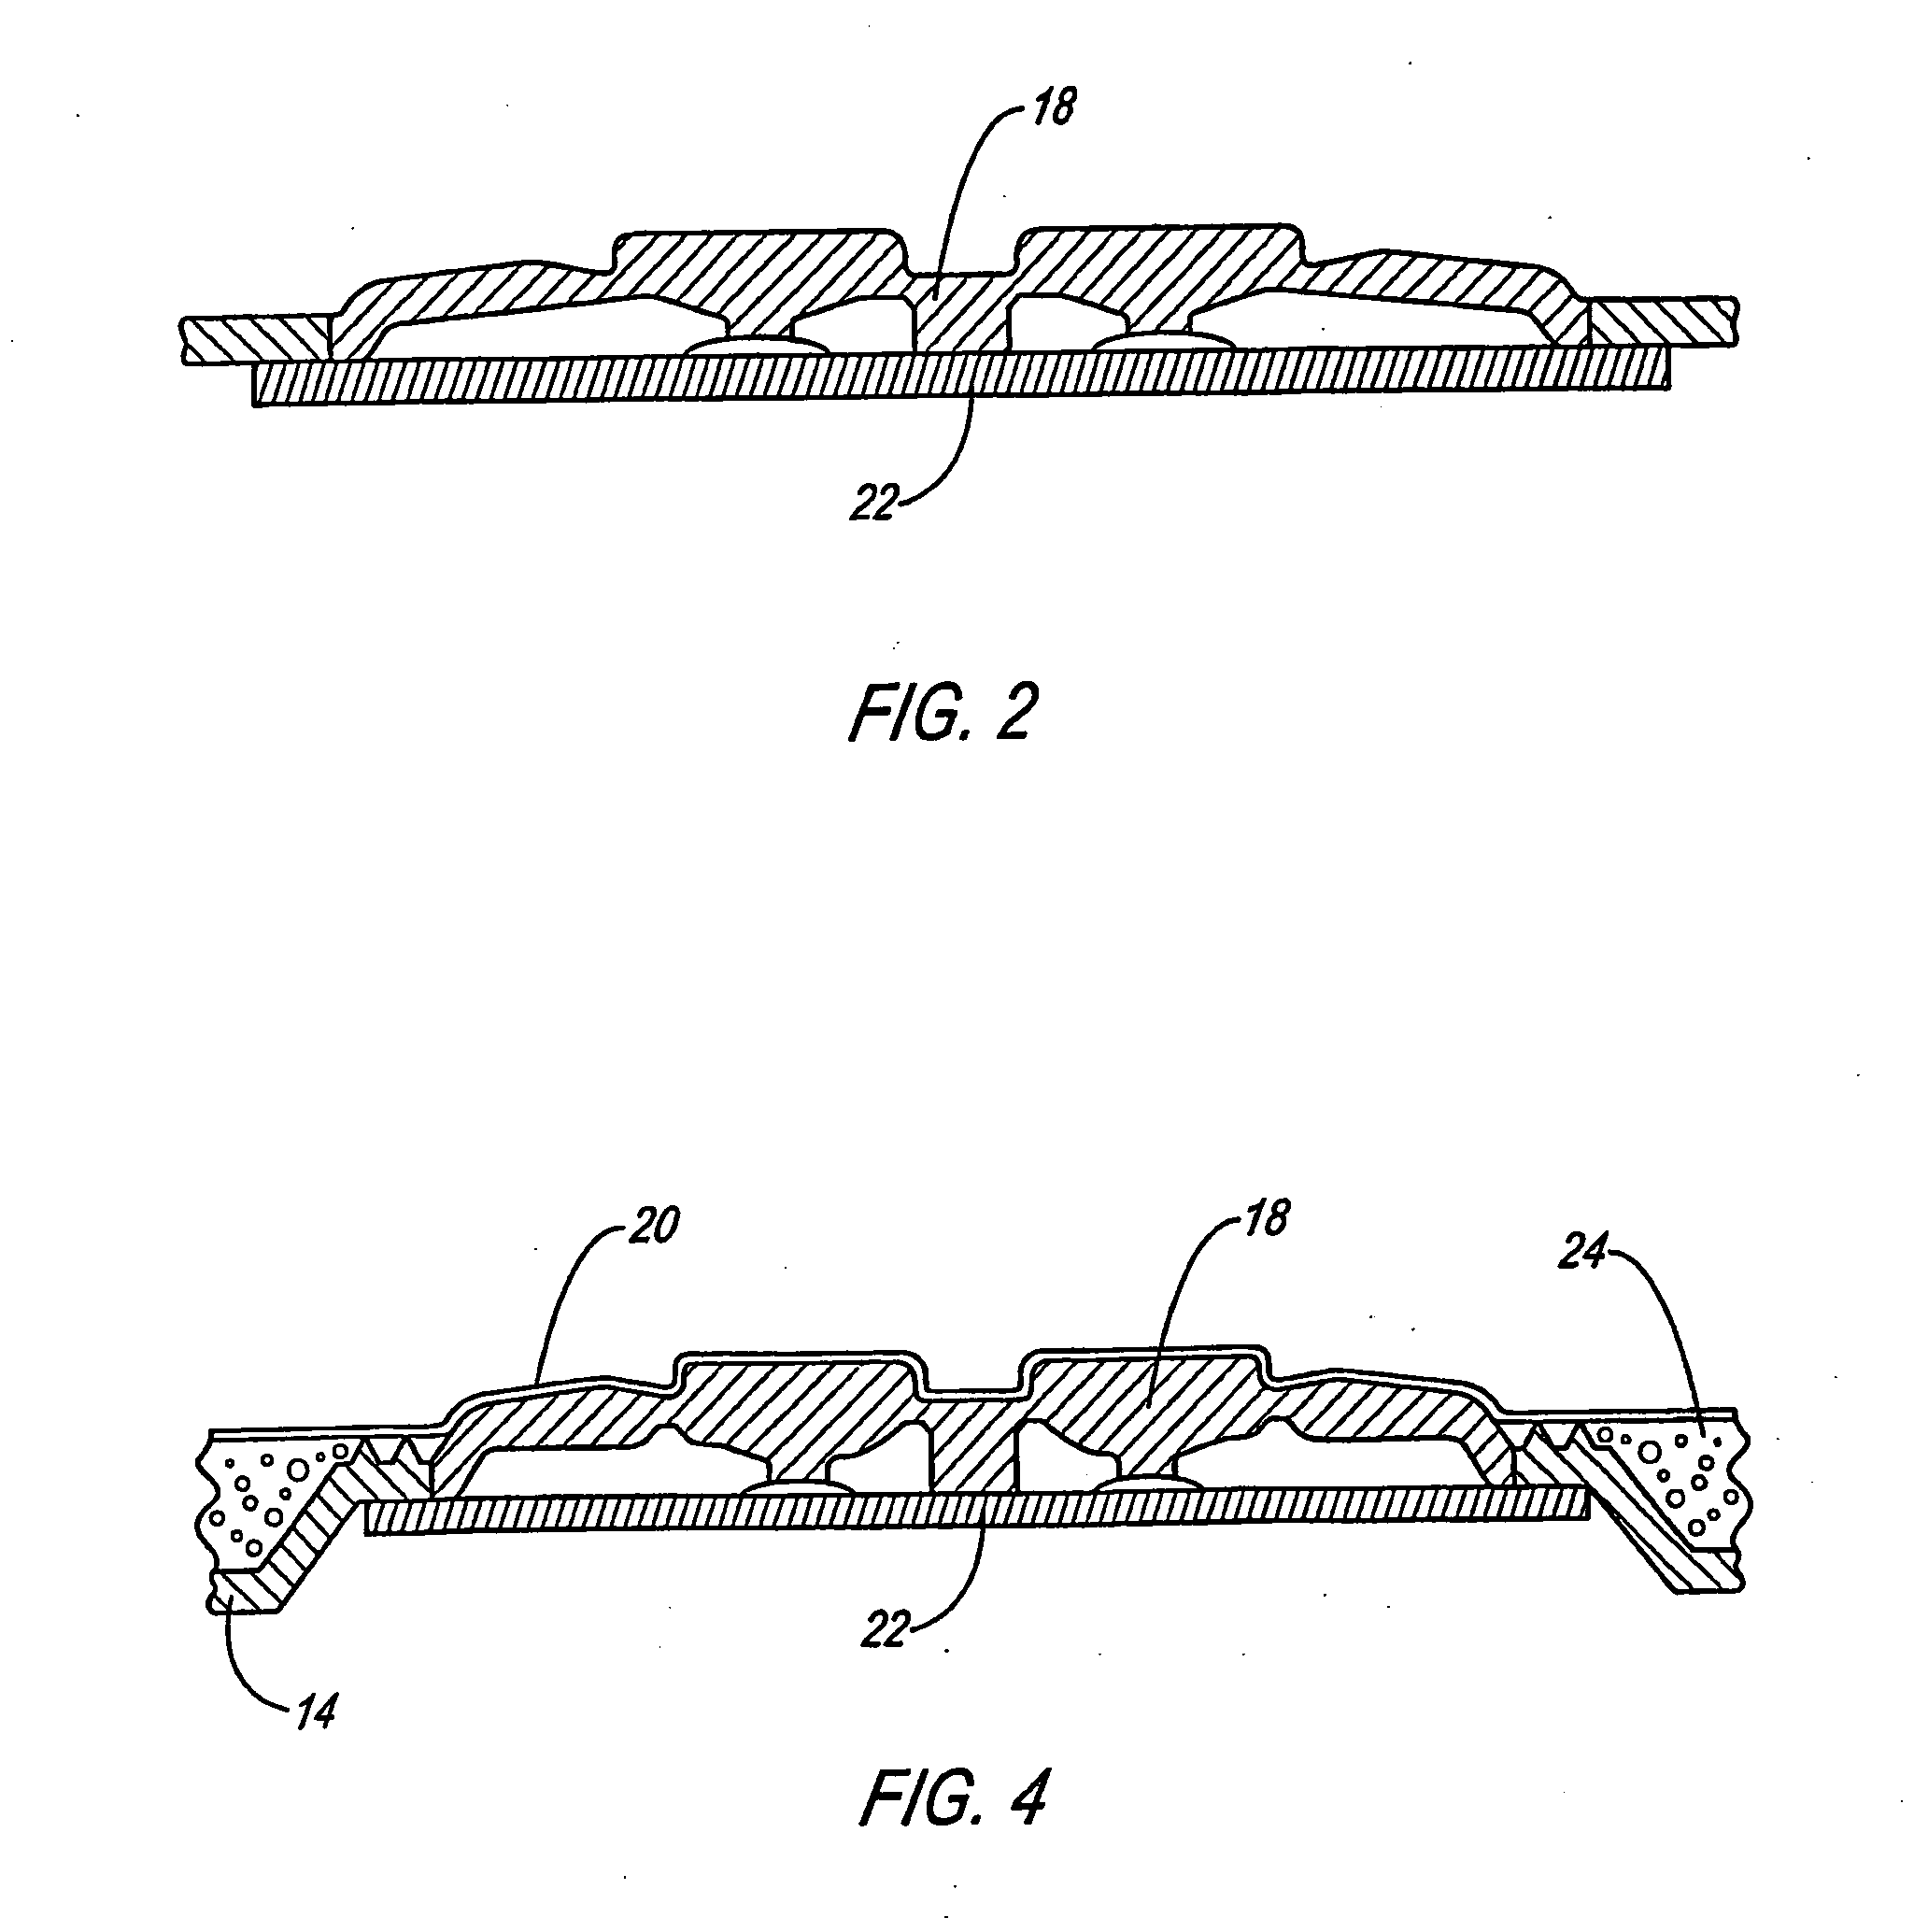 Multi-shot injection molded component and method of manufacture